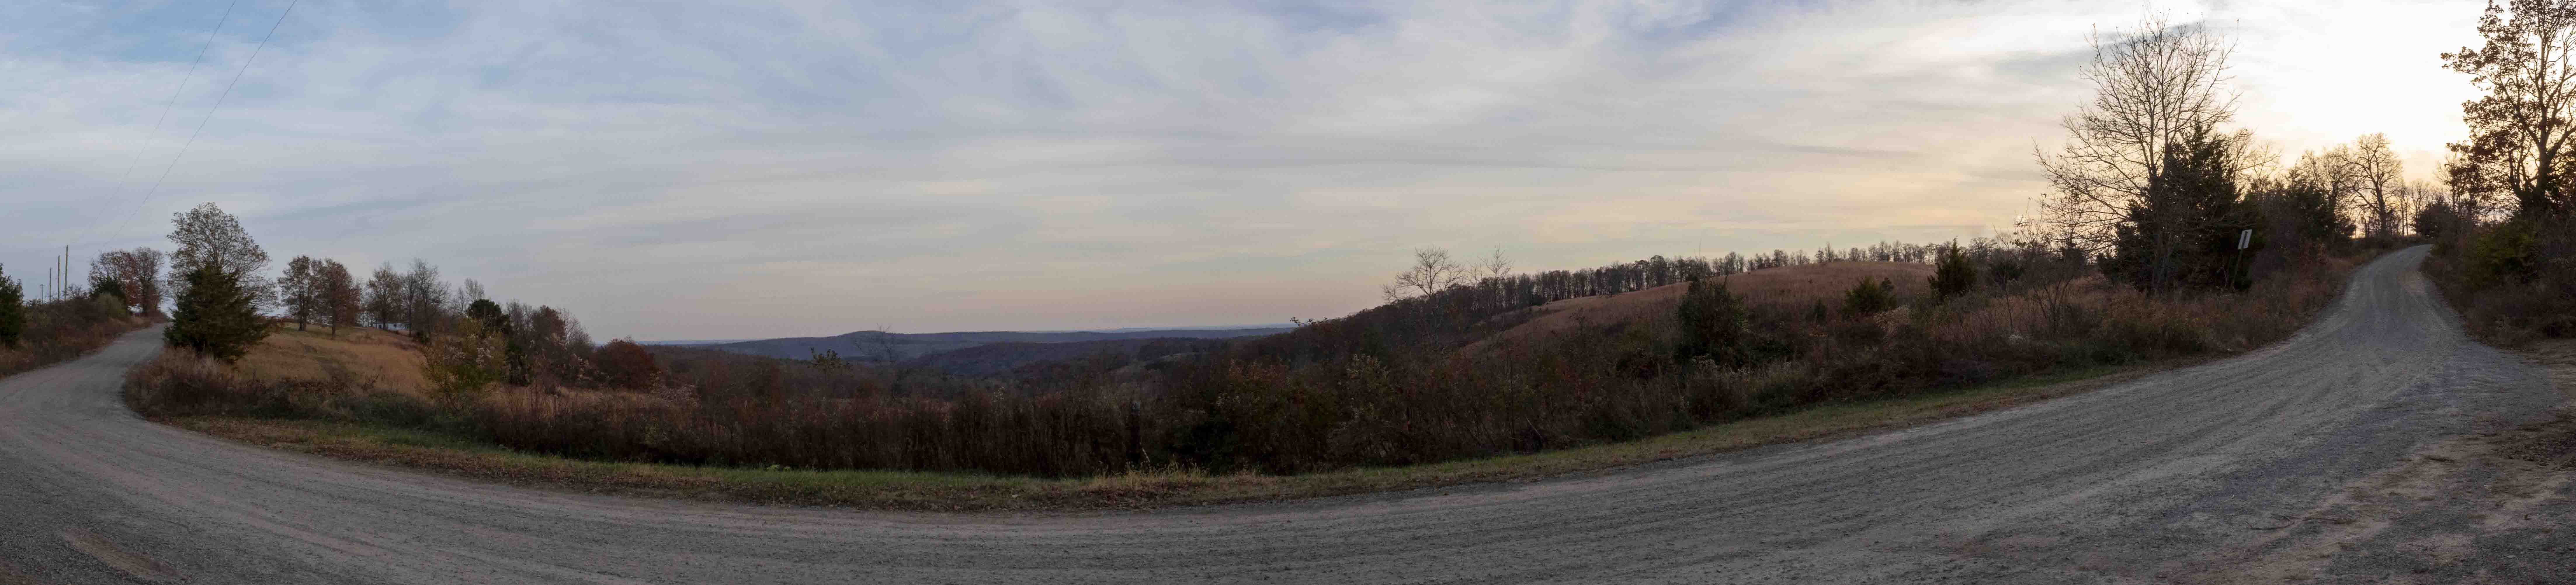 Panoramic photograph of a landscape.